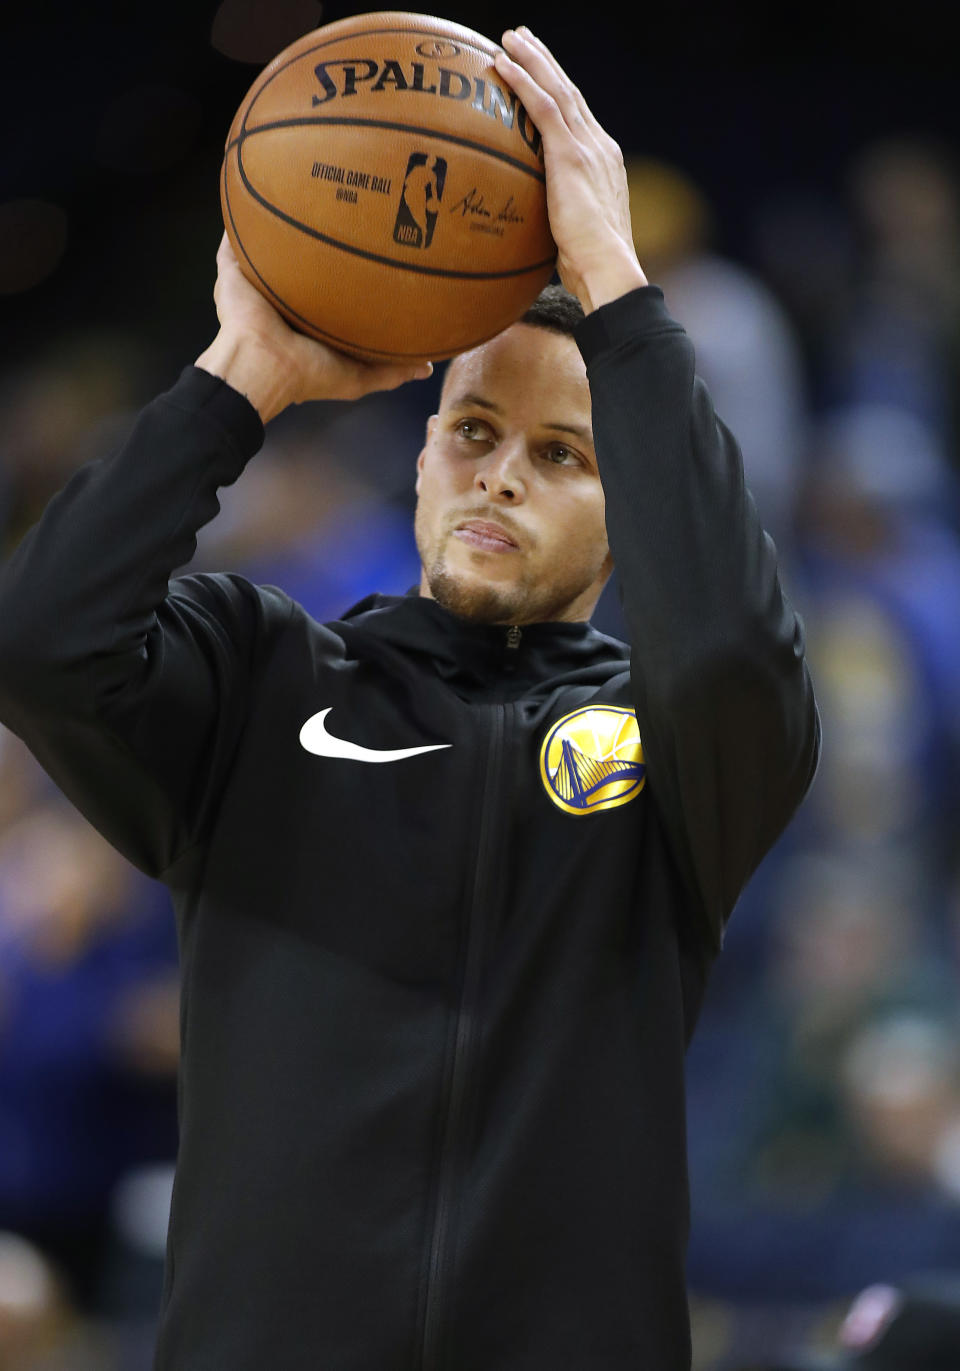 Golden State Warriors guard Stephen Curry warms up before the team's NBA basketball game against the Portland Trail Blazers in Oakland, Calif., Friday, Nov. 23, 2018. (AP Photo/Tony Avelar)